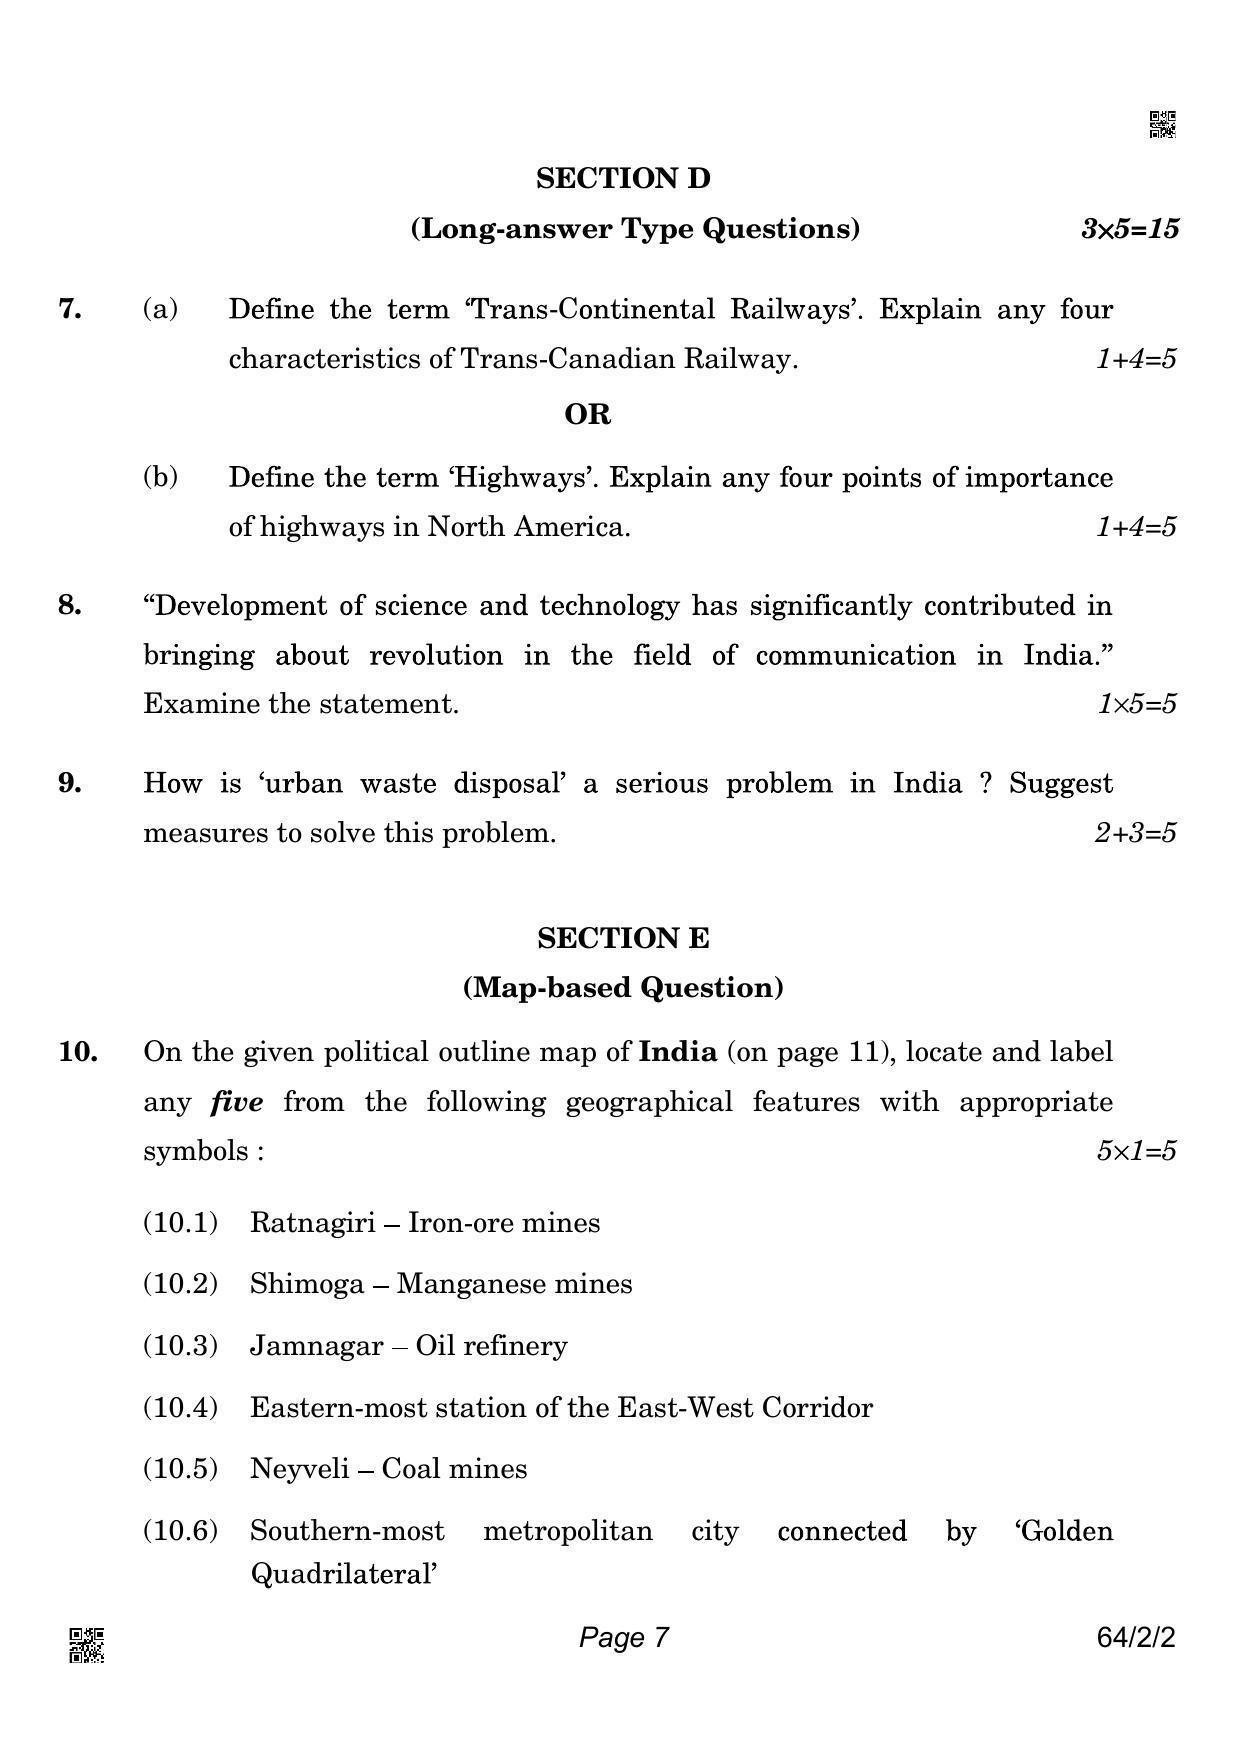 CBSE Class 12 64-2-2 Geography 2022 Question Paper - Page 7